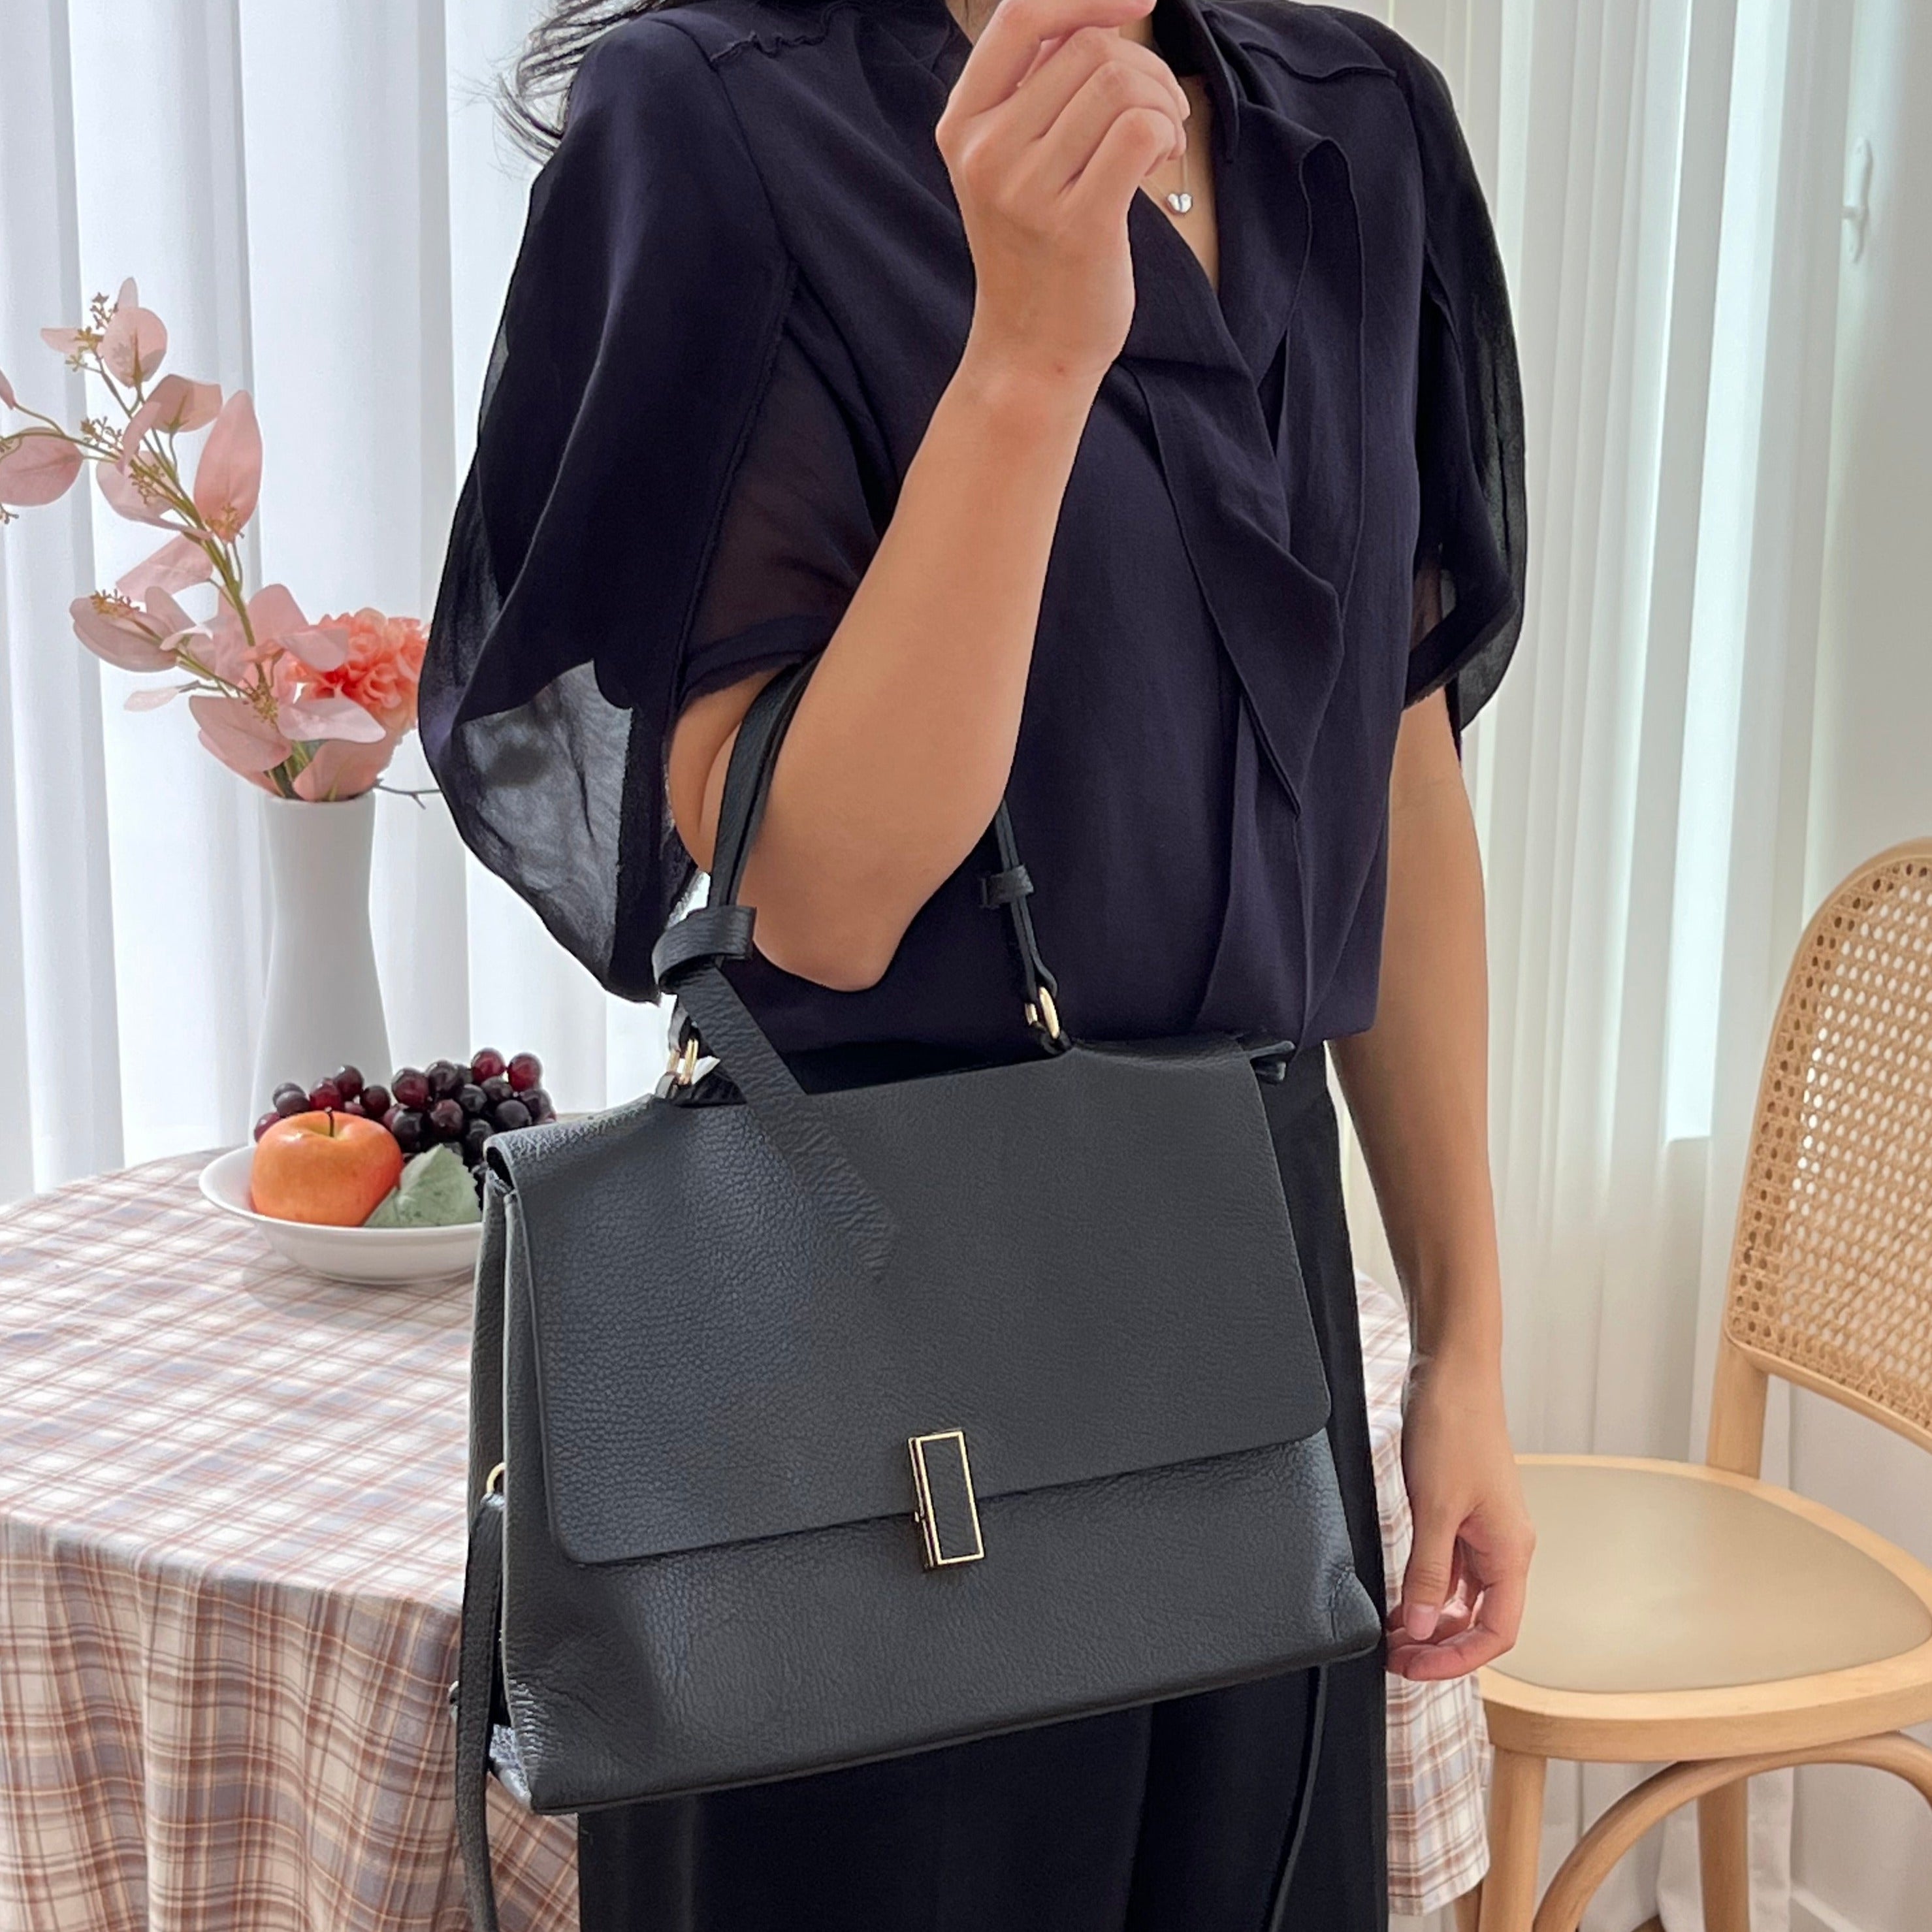 italy leather bag, leather tote, bucket bag, leather bucket bag, iminglobal, made in italy, Italian bag, italy bag, firenze bag, made in firenze, women tote, ladies tote bag, 